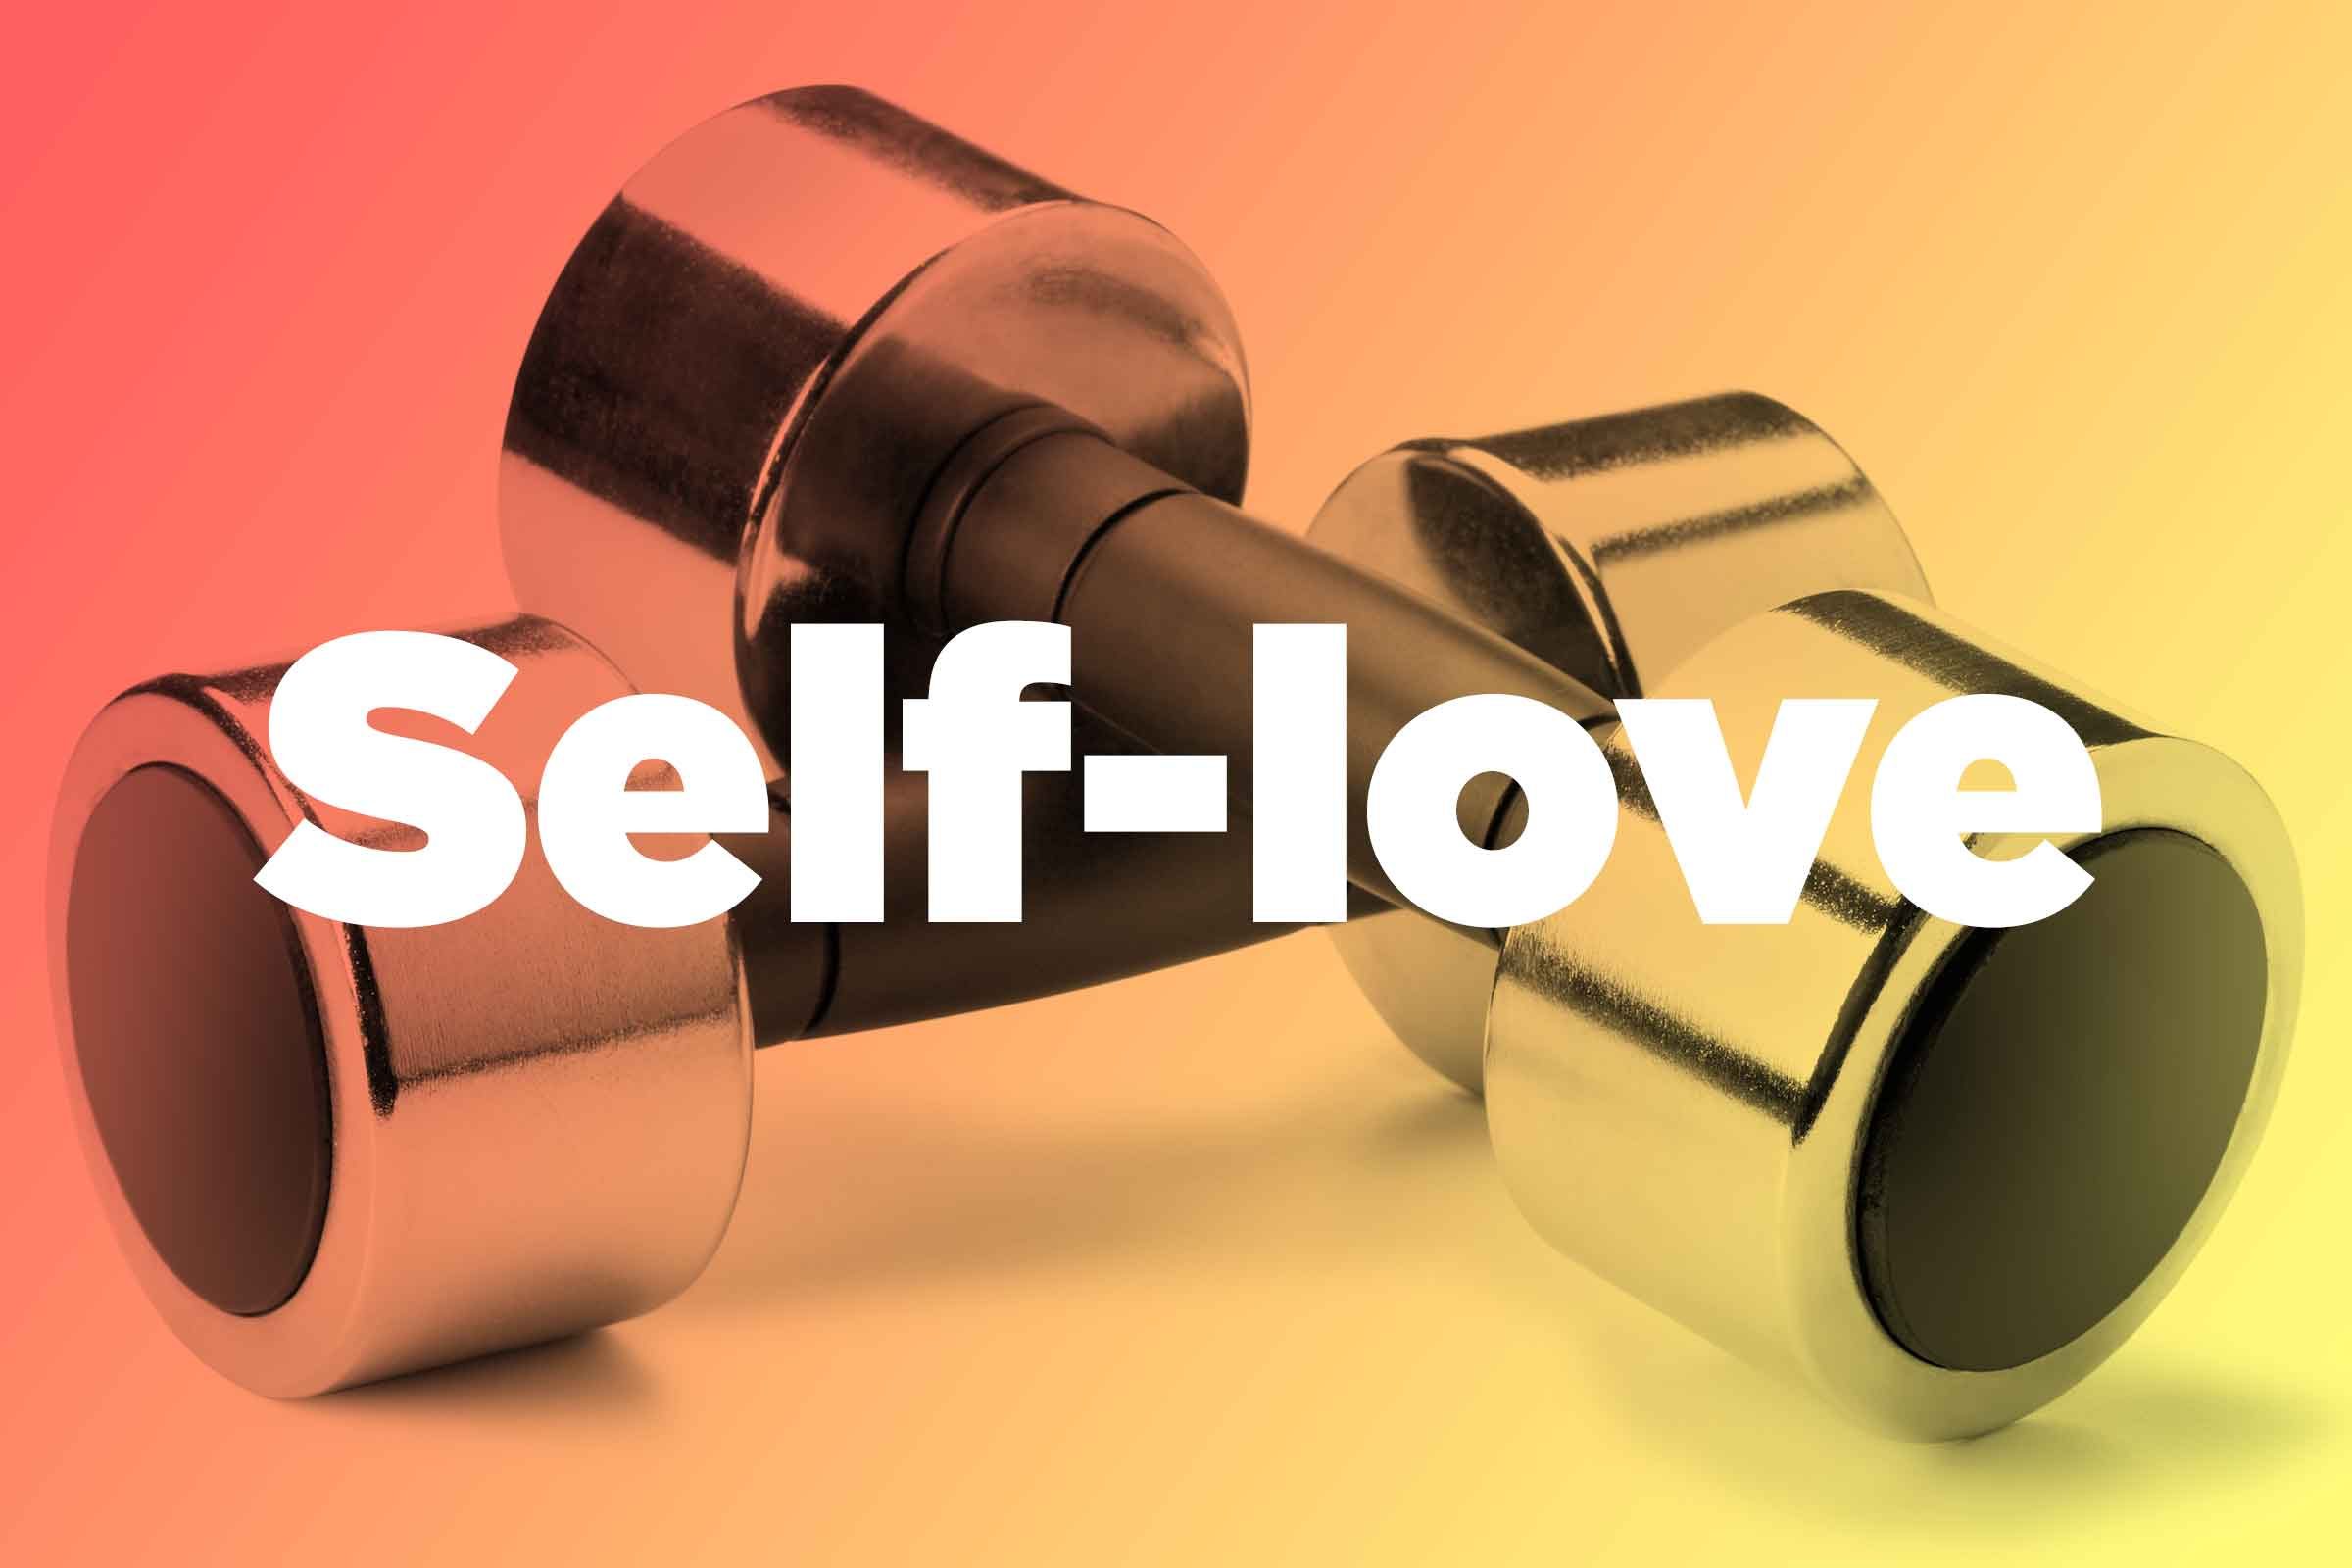 Exercise out of self-love, not self-loathing